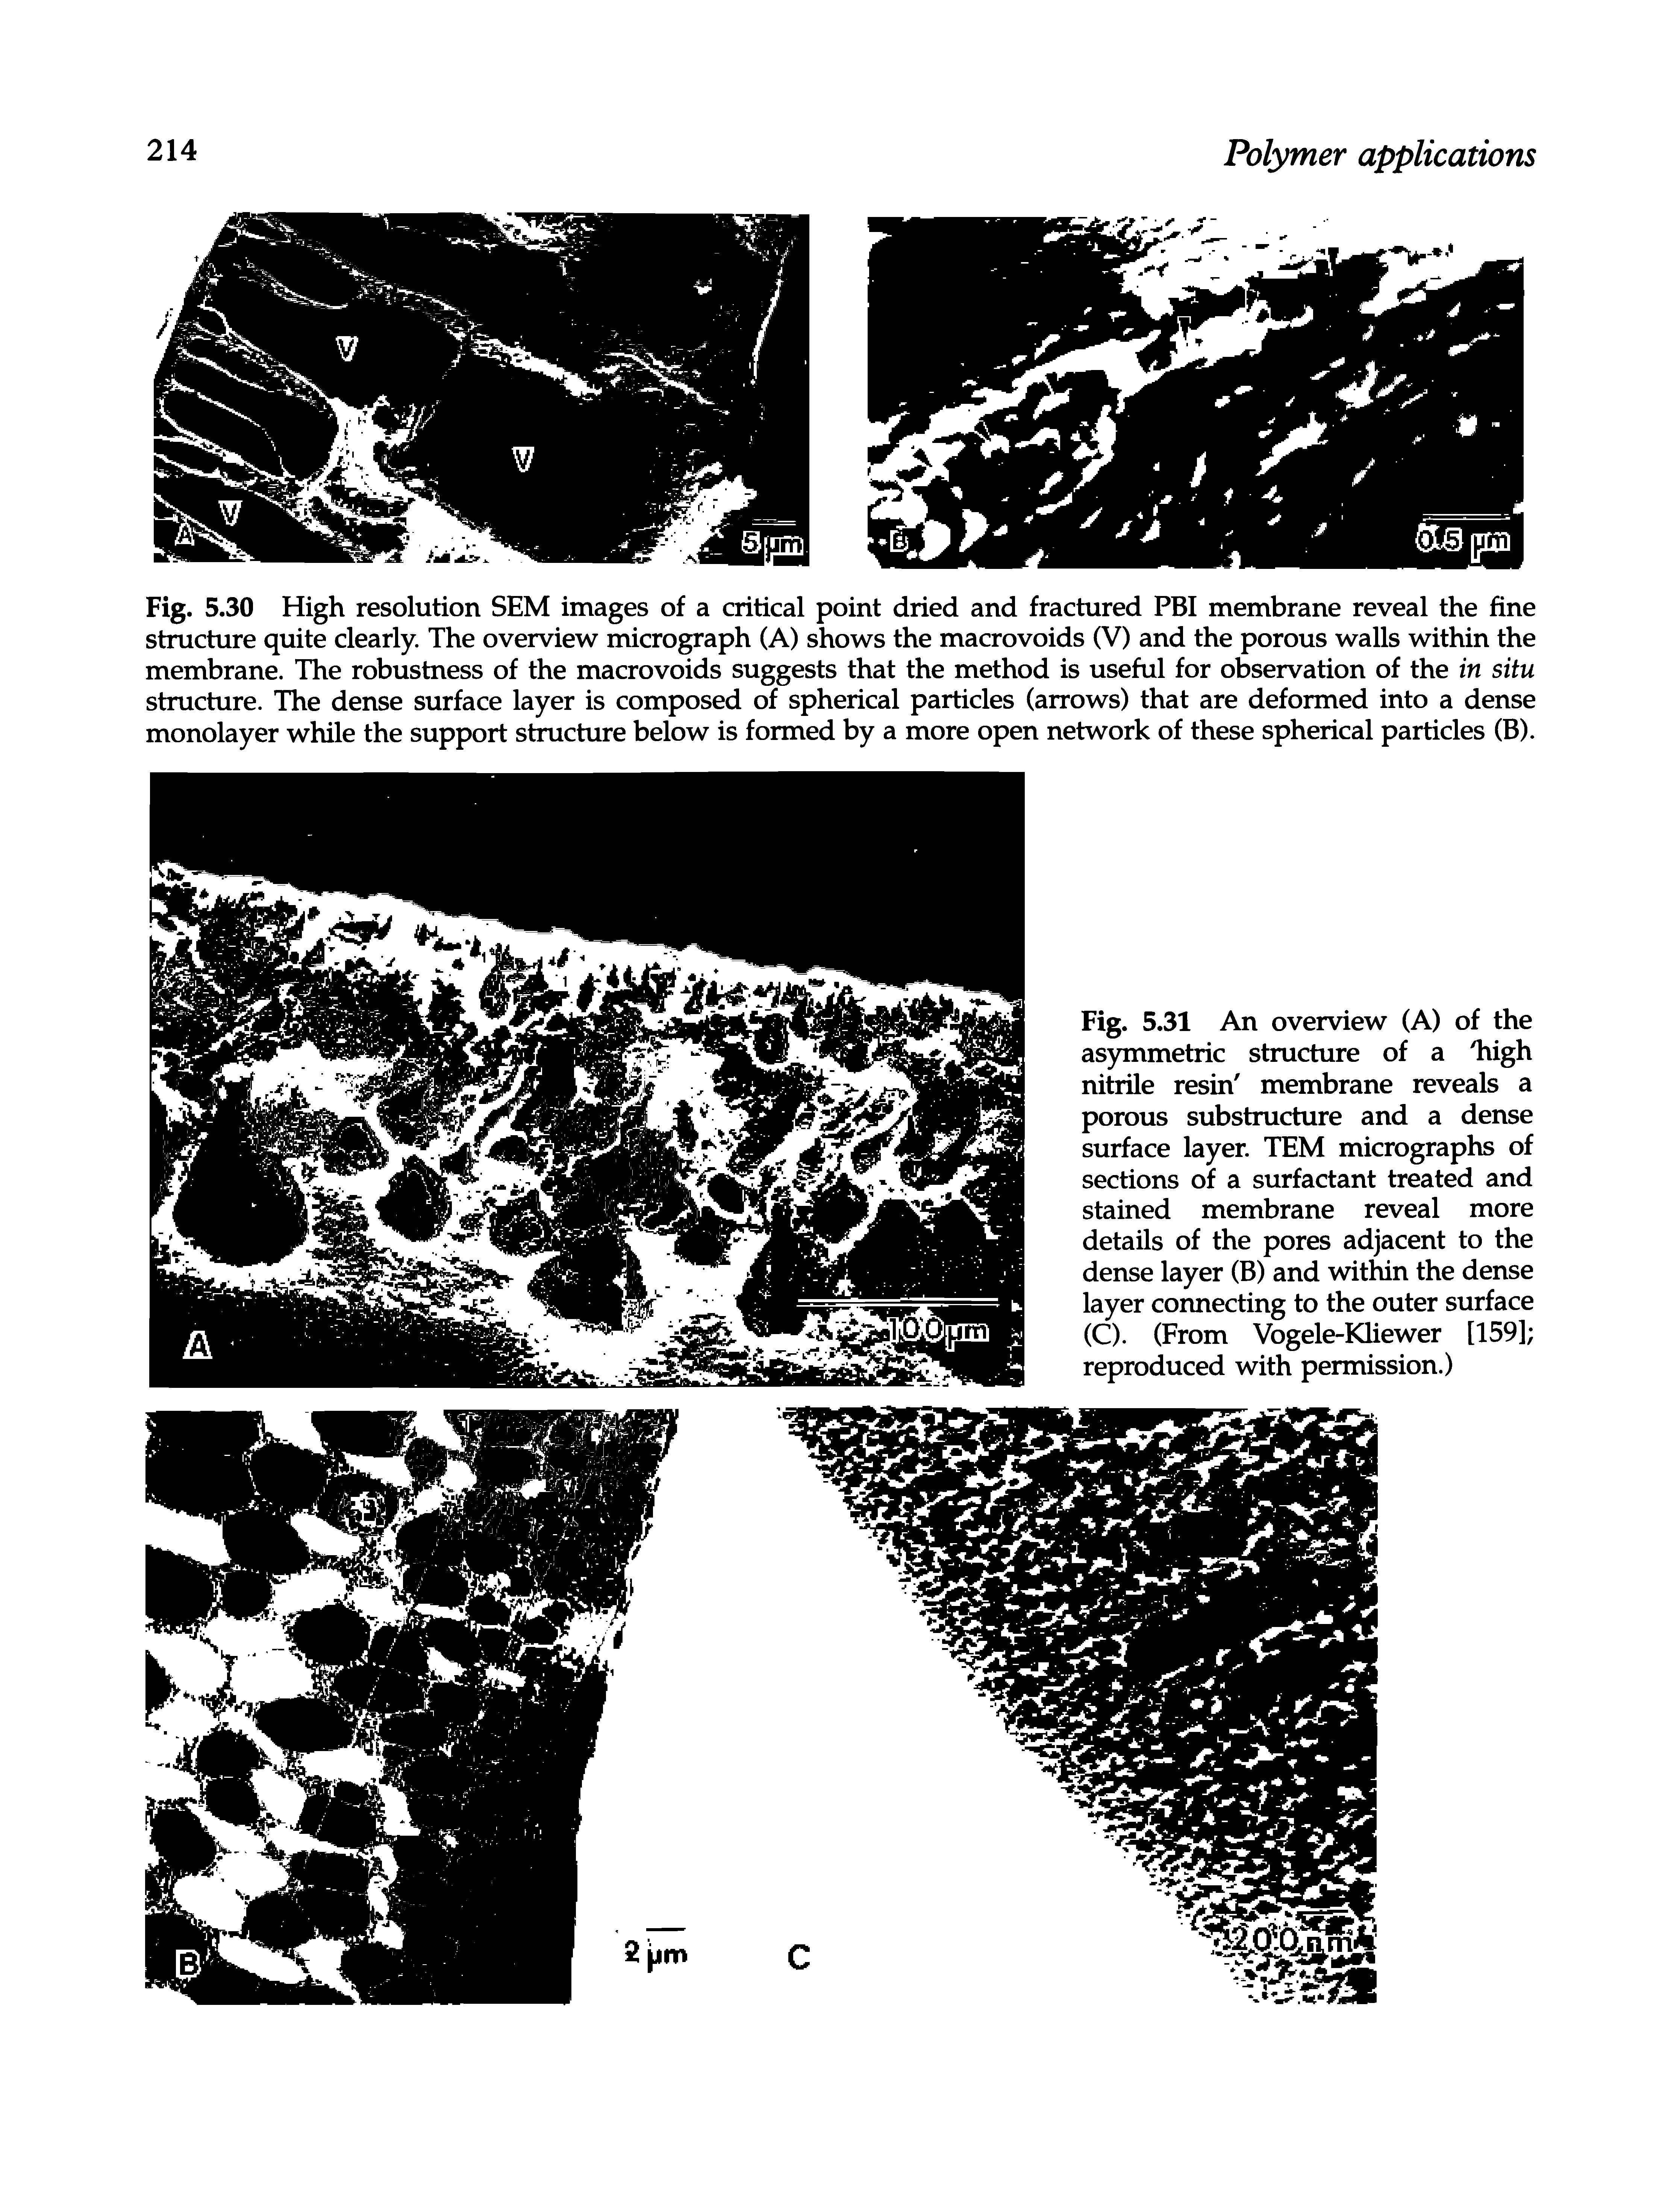 Fig. 5.30 High resolution SEM images of a critical point dried and fractured FBI membrane reveal the fine structure quite clearly. The overview micrograph (A) shows the macrovoids (V) and the porous walls within the membrane. The robustness of the macrovoids suggests that the method is useful for observation of the in situ structure. The dense surface layer is composed of spherical particles (arrows) that are deformed into a dense monolayer while the support structure below is formed by a more open network of these spherical particles (B).